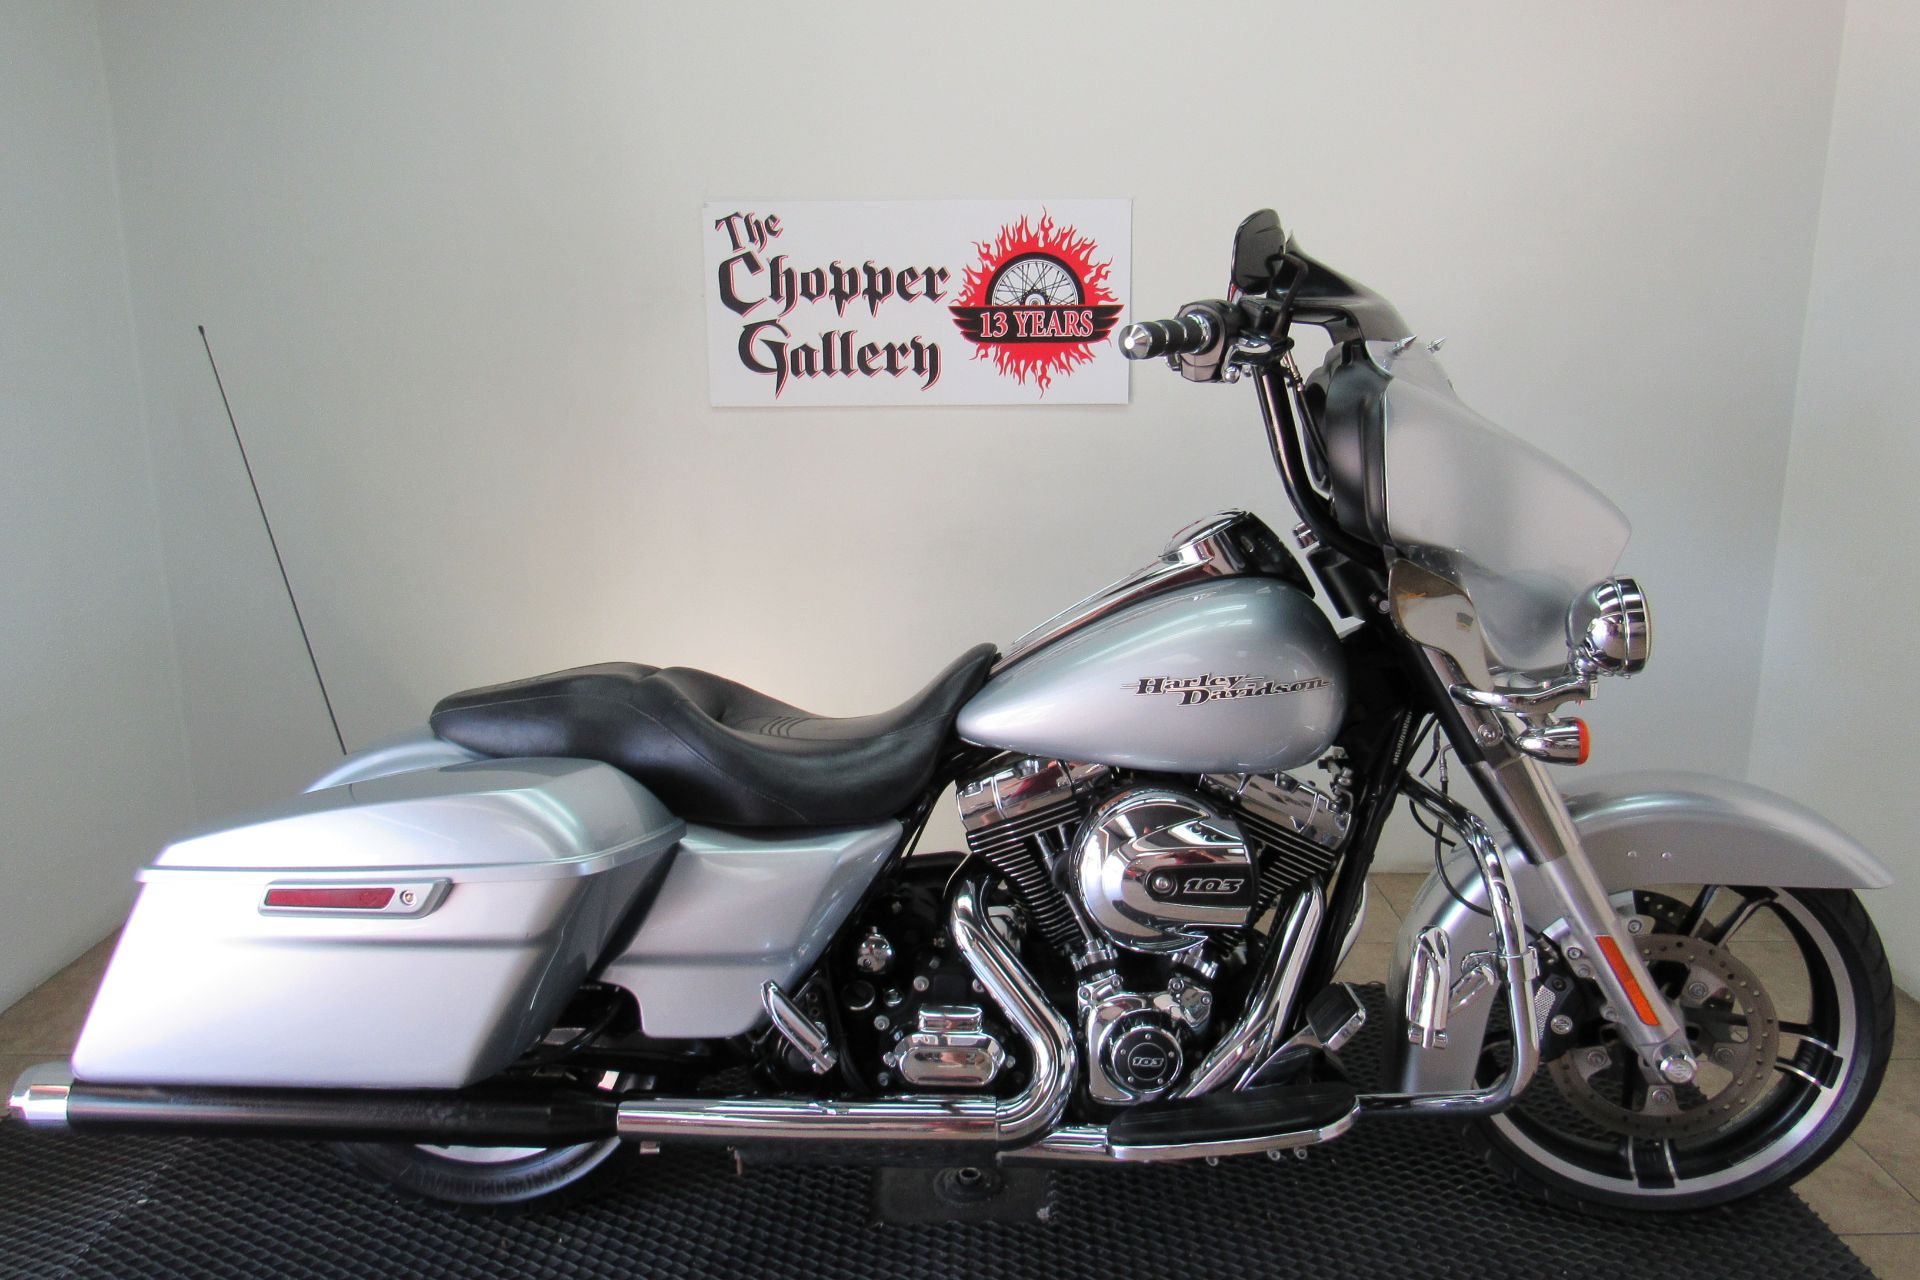 Used 2014 Harley Davidson Street Glide Motorcycles In Temecula Ca Stock Number V1693544